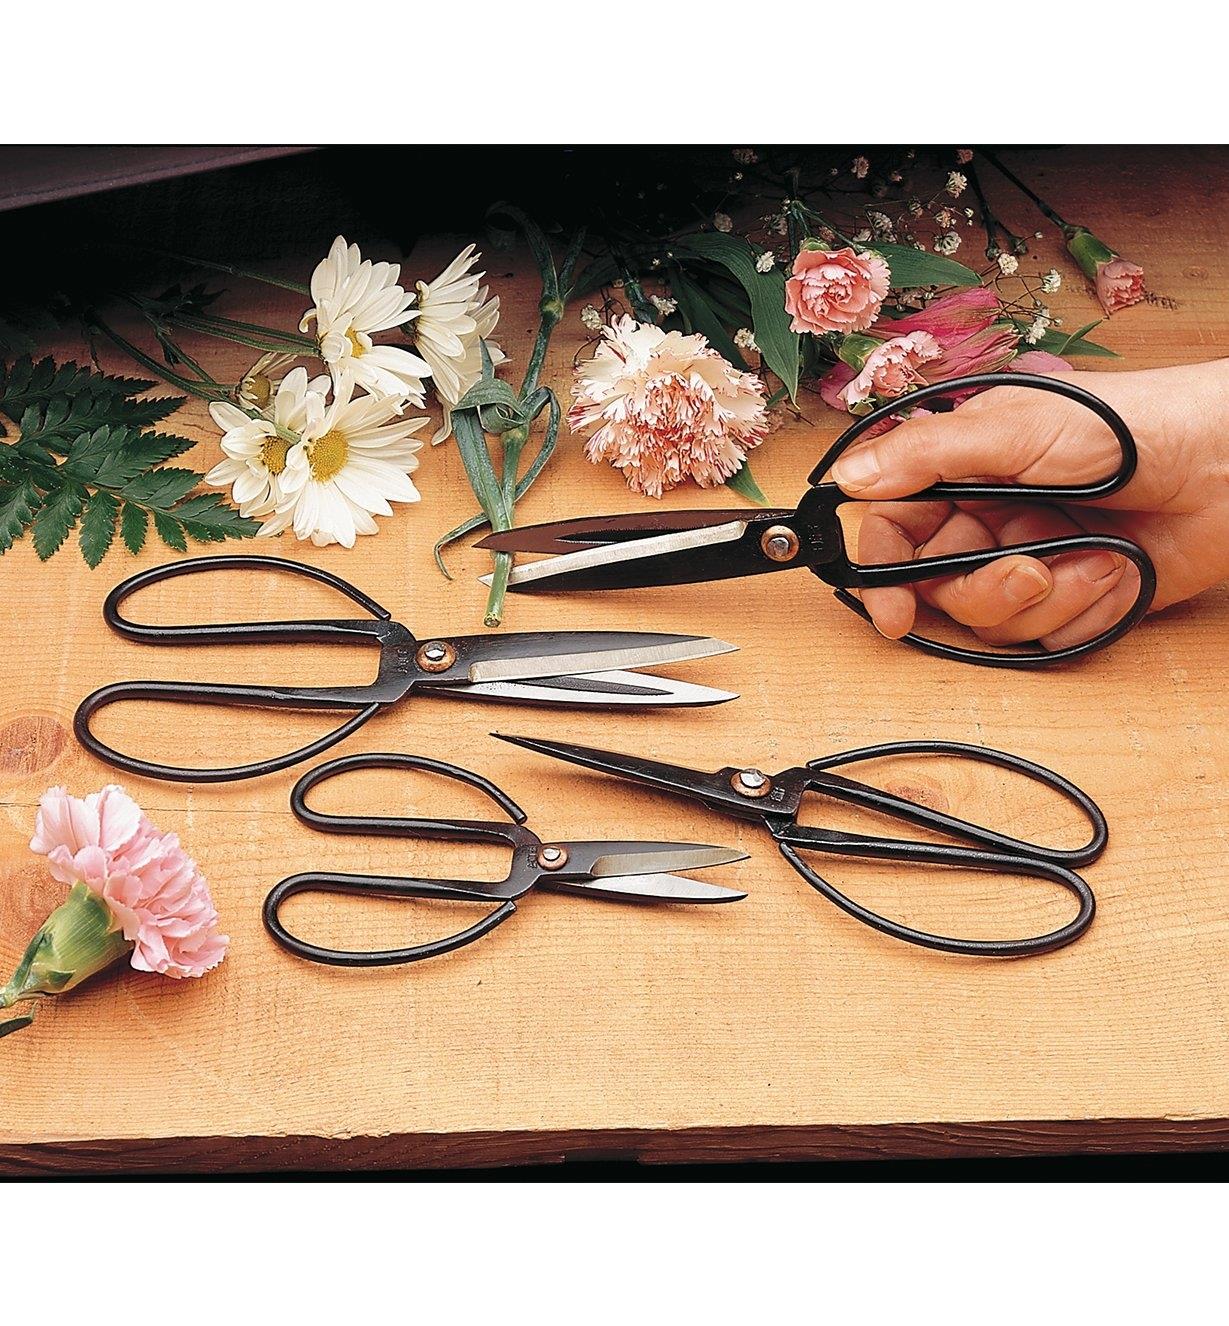 Using Chinese Scissors to cut flower stems